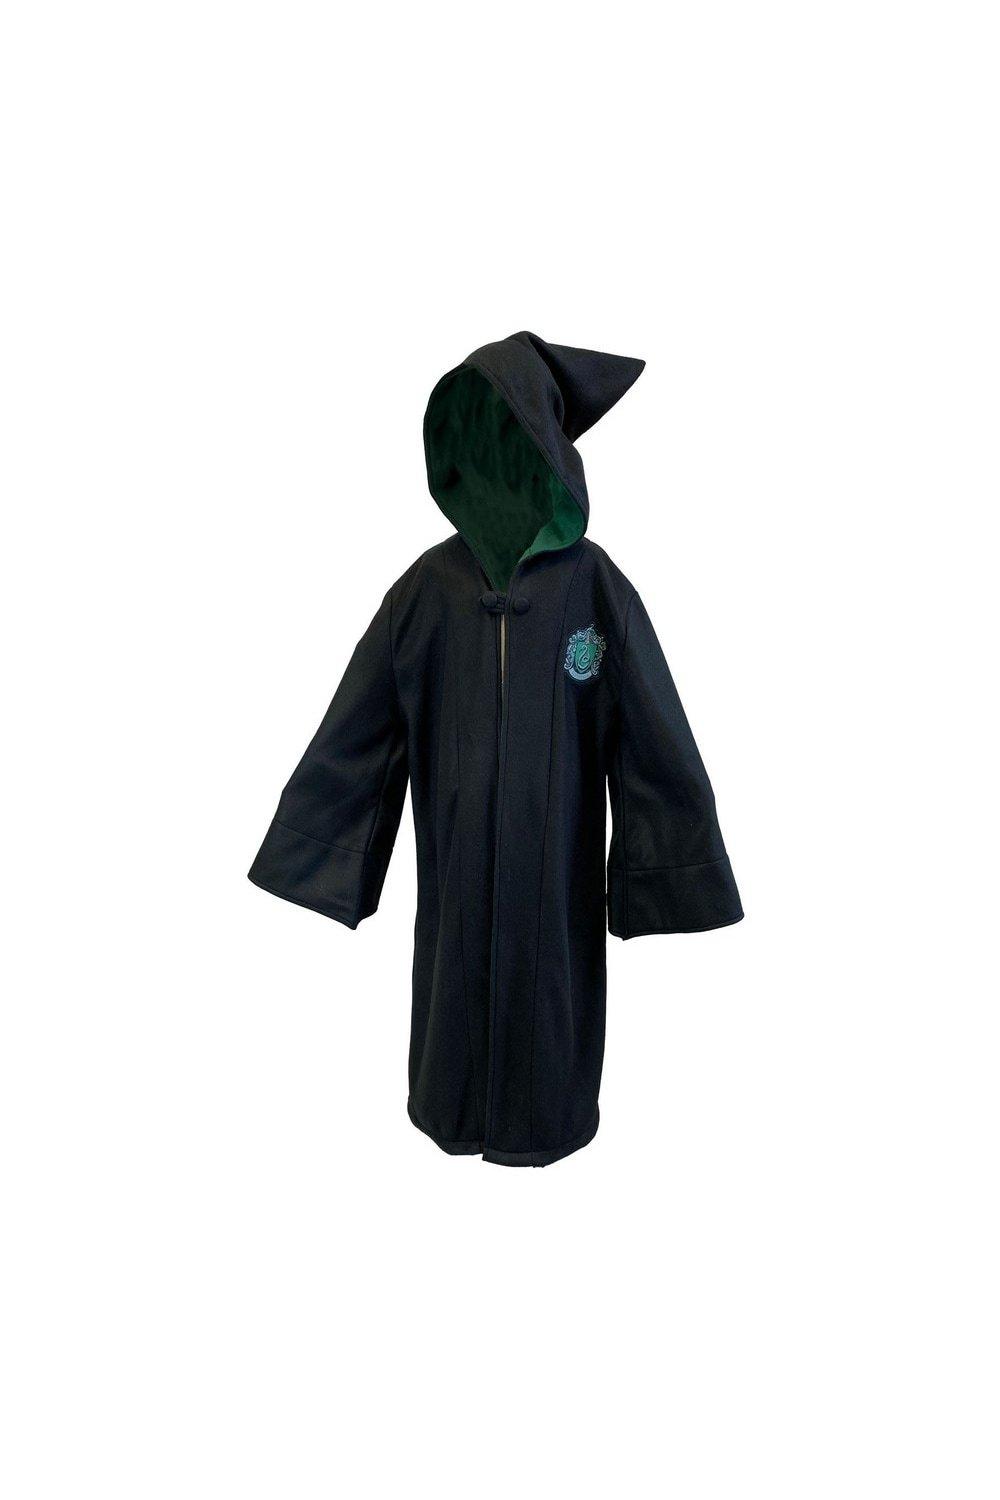 Slytherin Replica Gown